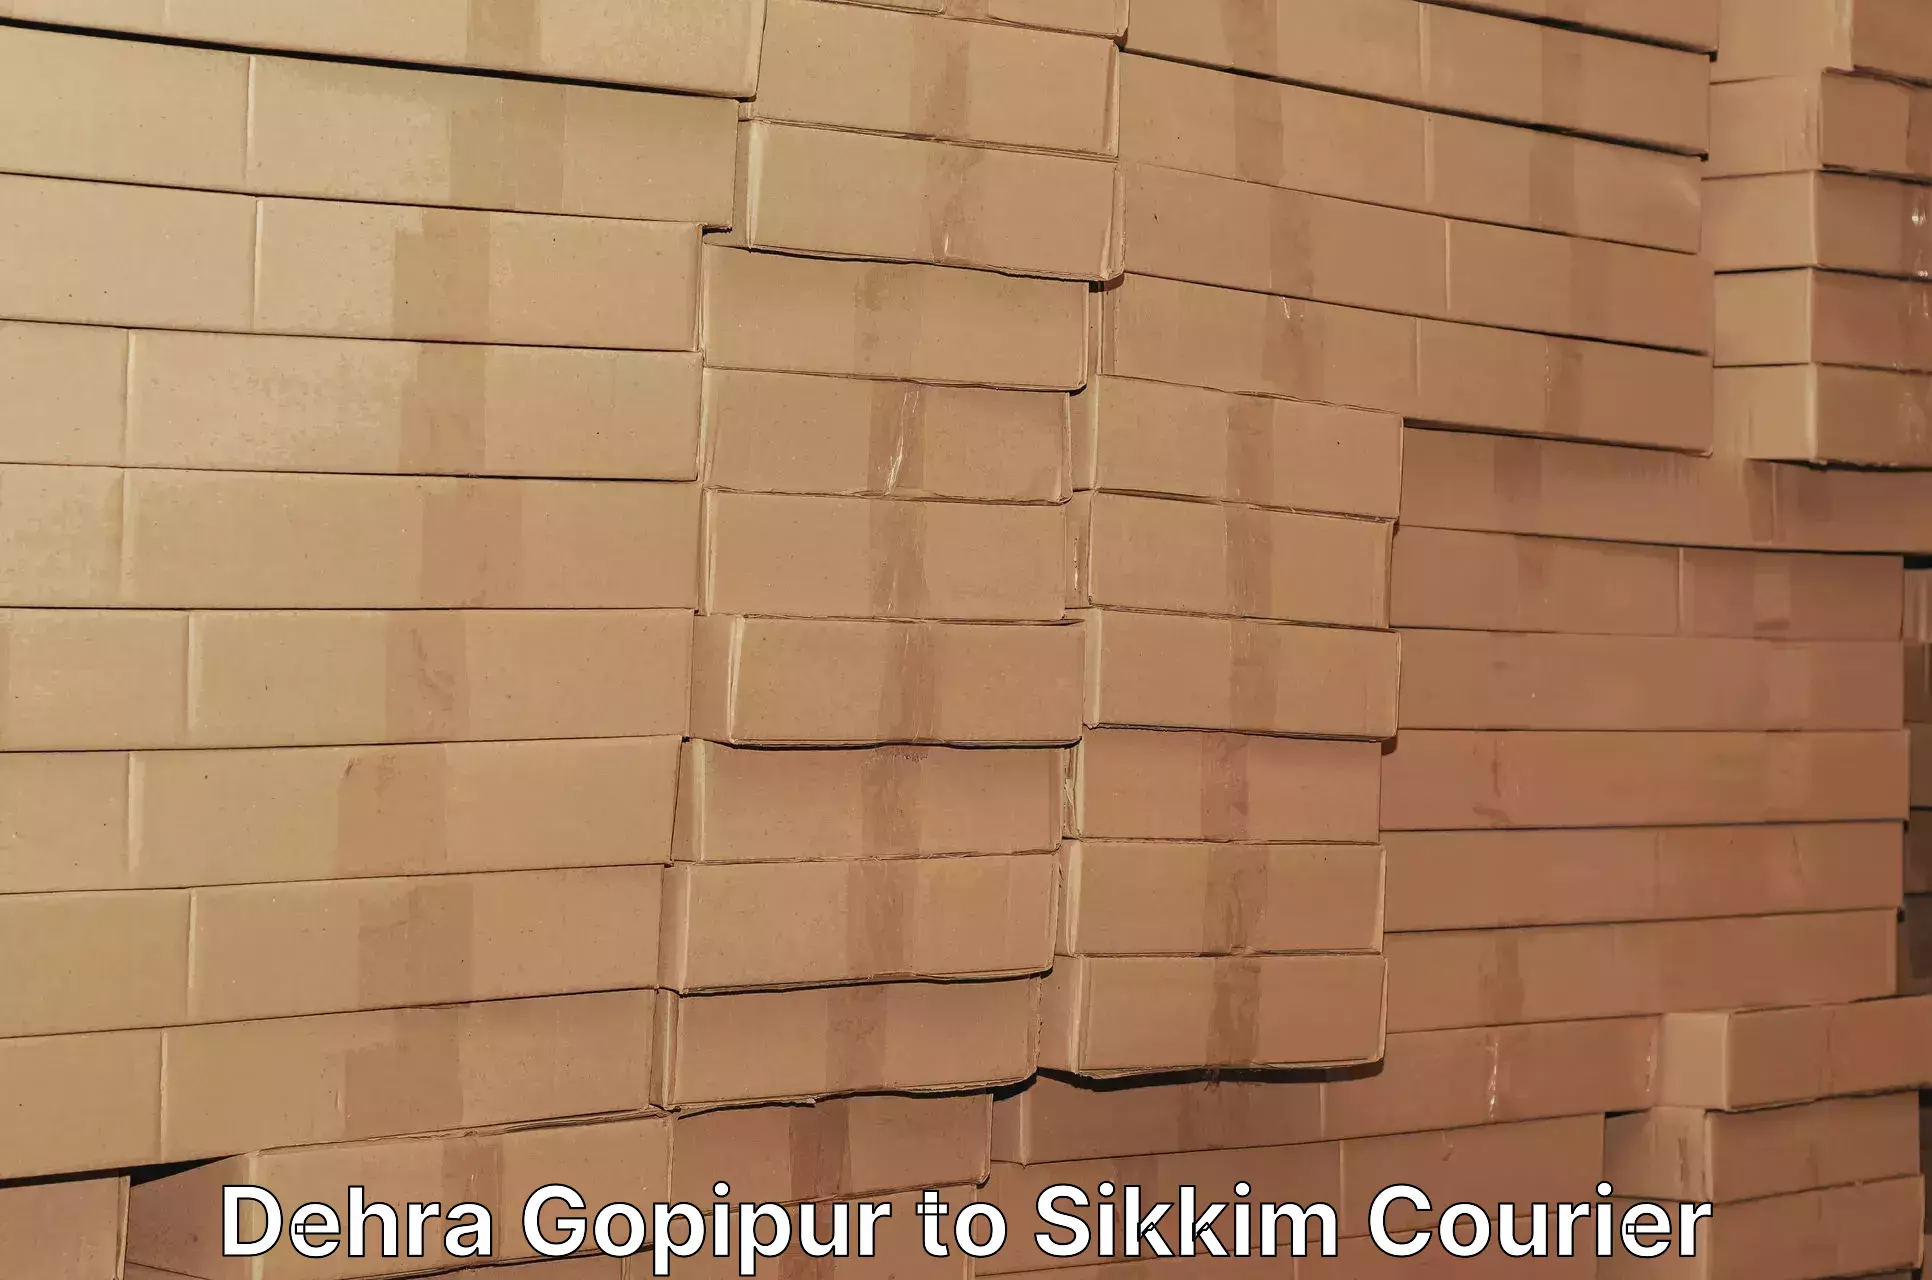 Business shipping needs Dehra Gopipur to North Sikkim